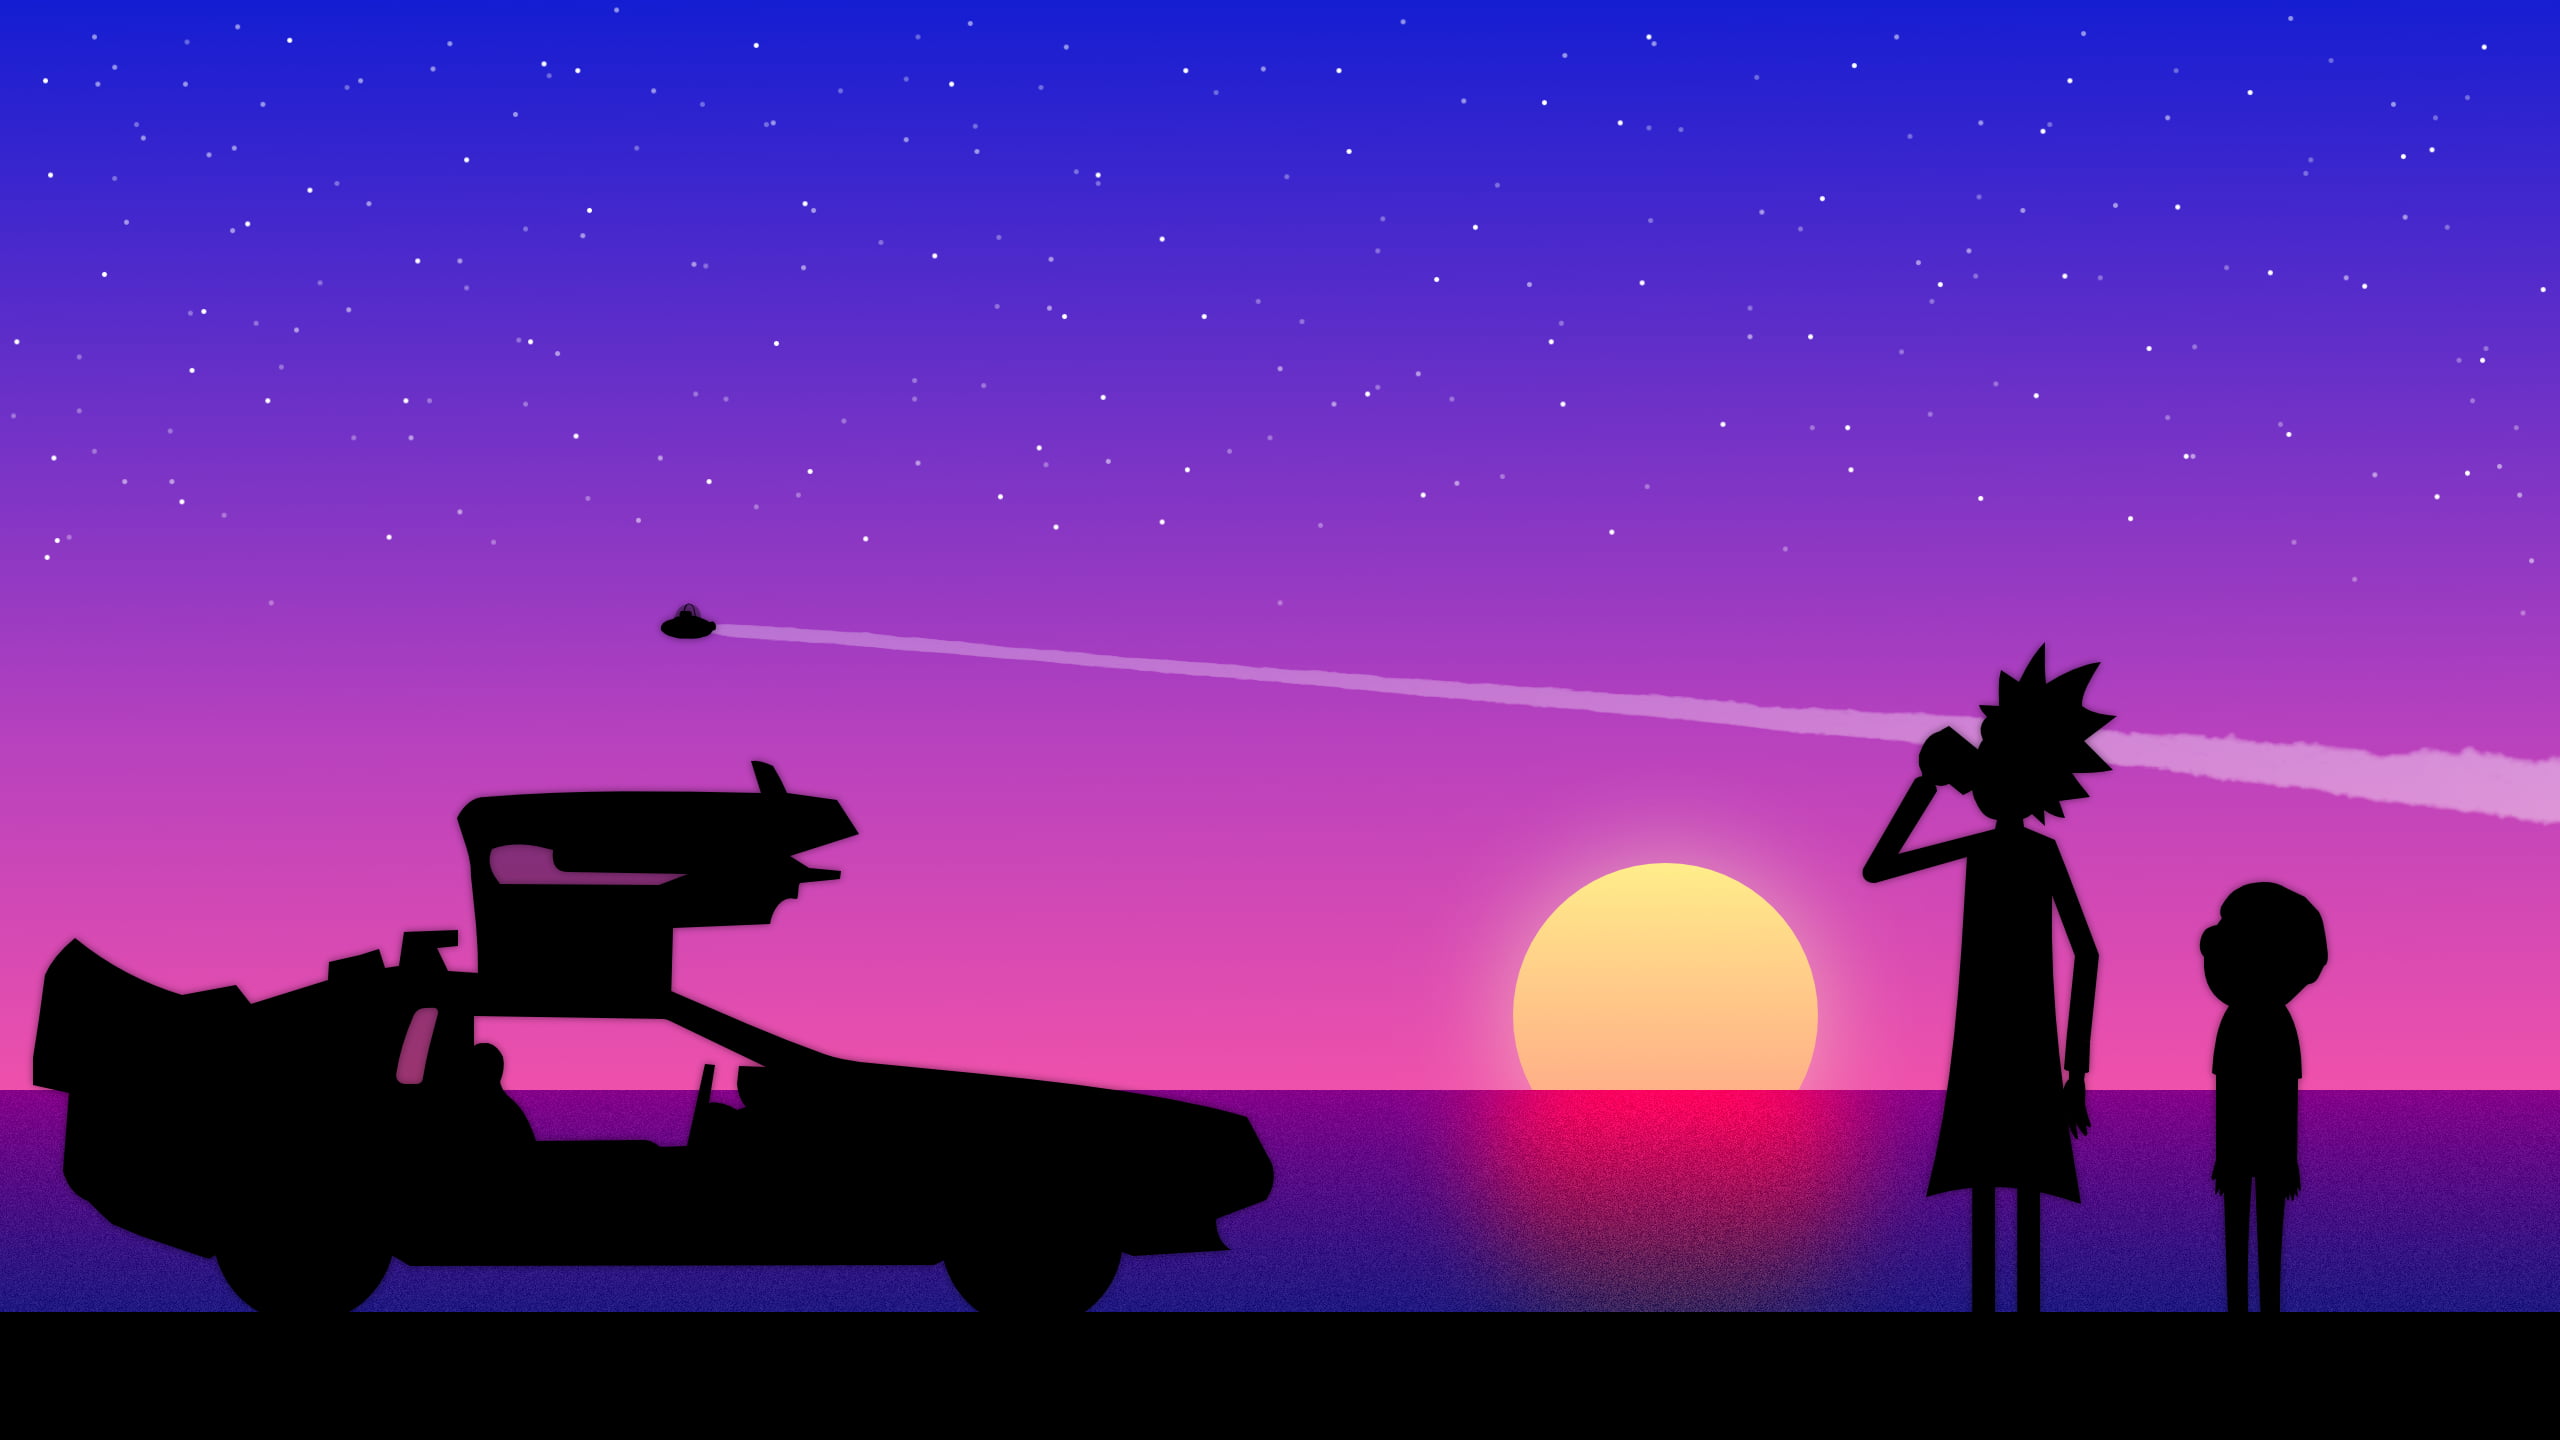 caricature, Rick and Morty, DeLorean, Time Machine, sunset